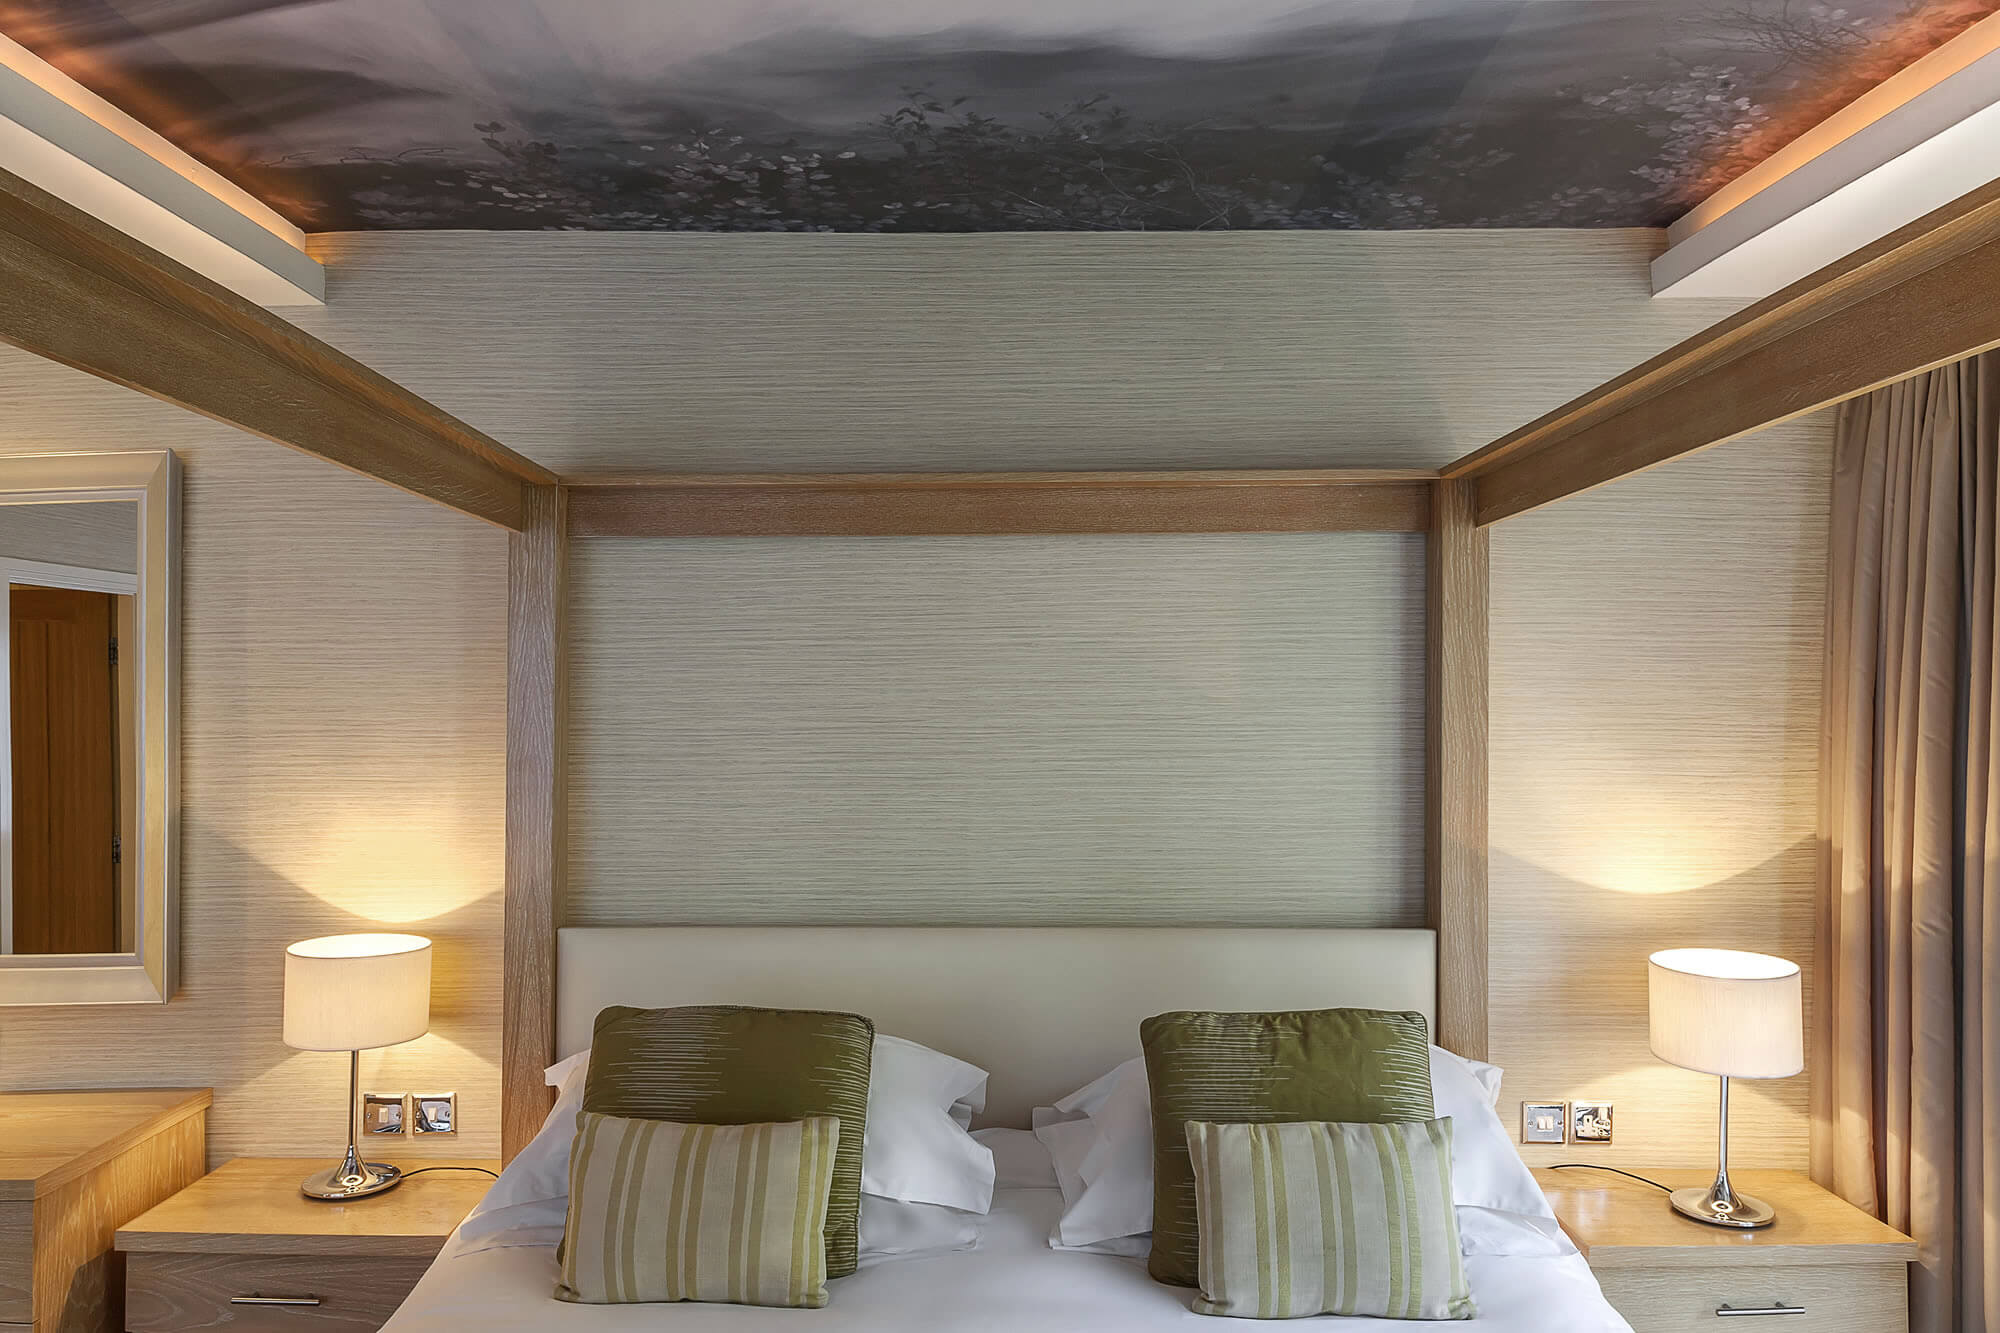 The Waterside Hotel Rooms at The Langdale Hotel & Spa